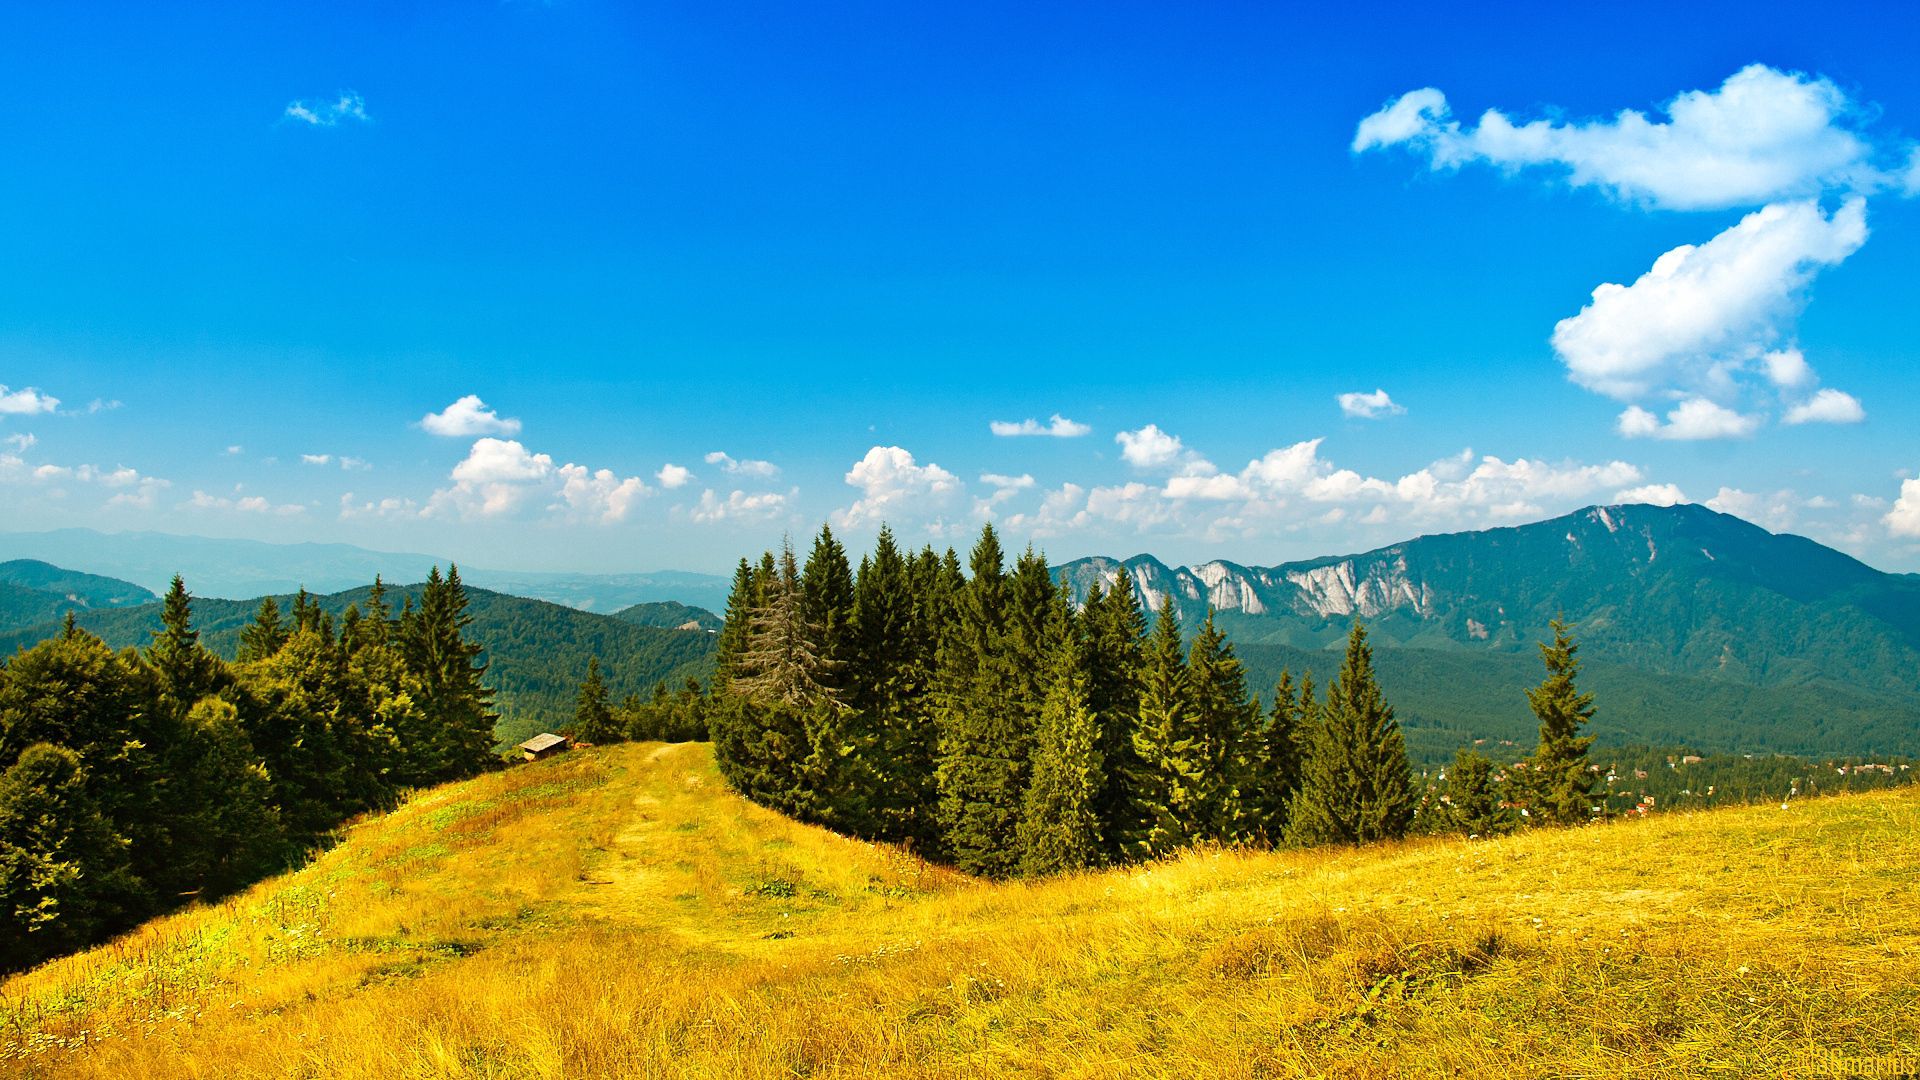 nature, trees, sky, mountains, yellow, blue, conifers, coniferous, freshness, sunny, clear, i see